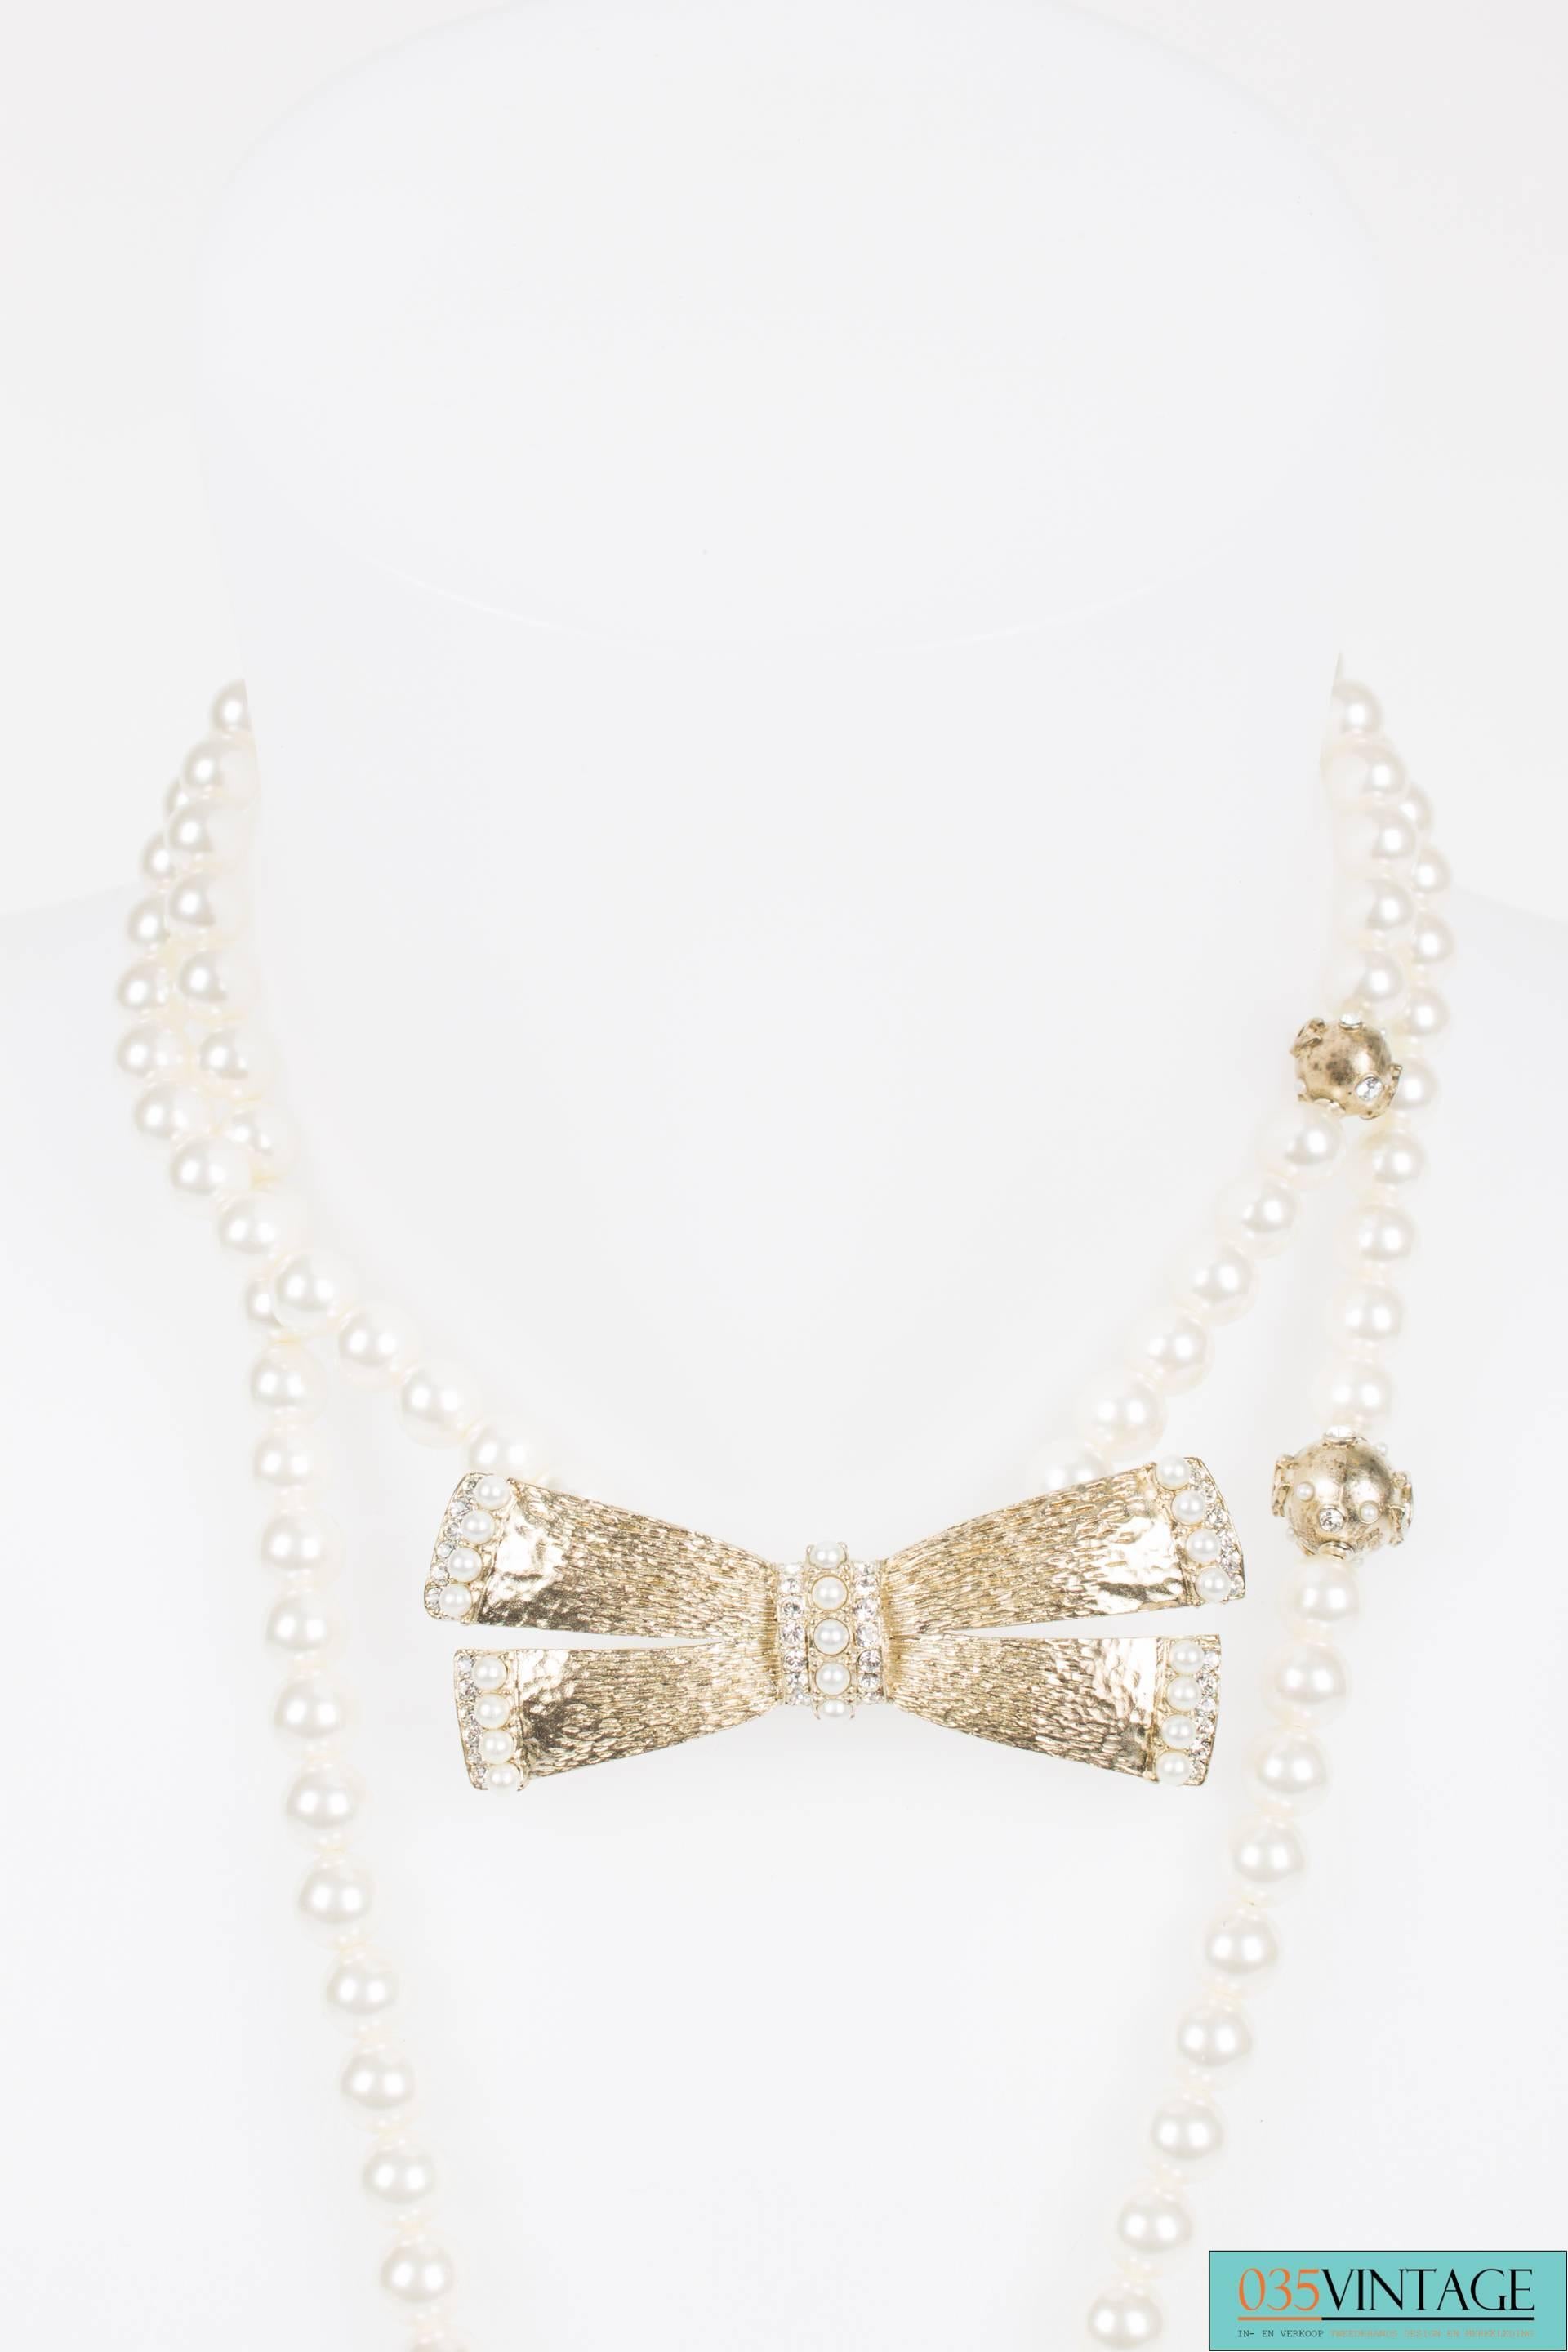 This beautiful Chanel necklace measures as much as 130 centimeters and can be worn in different ways.

The bow can be placed directly around the neck, so the necklace has a longer and a shorter part.  Or you can just wear it 'single', simply place